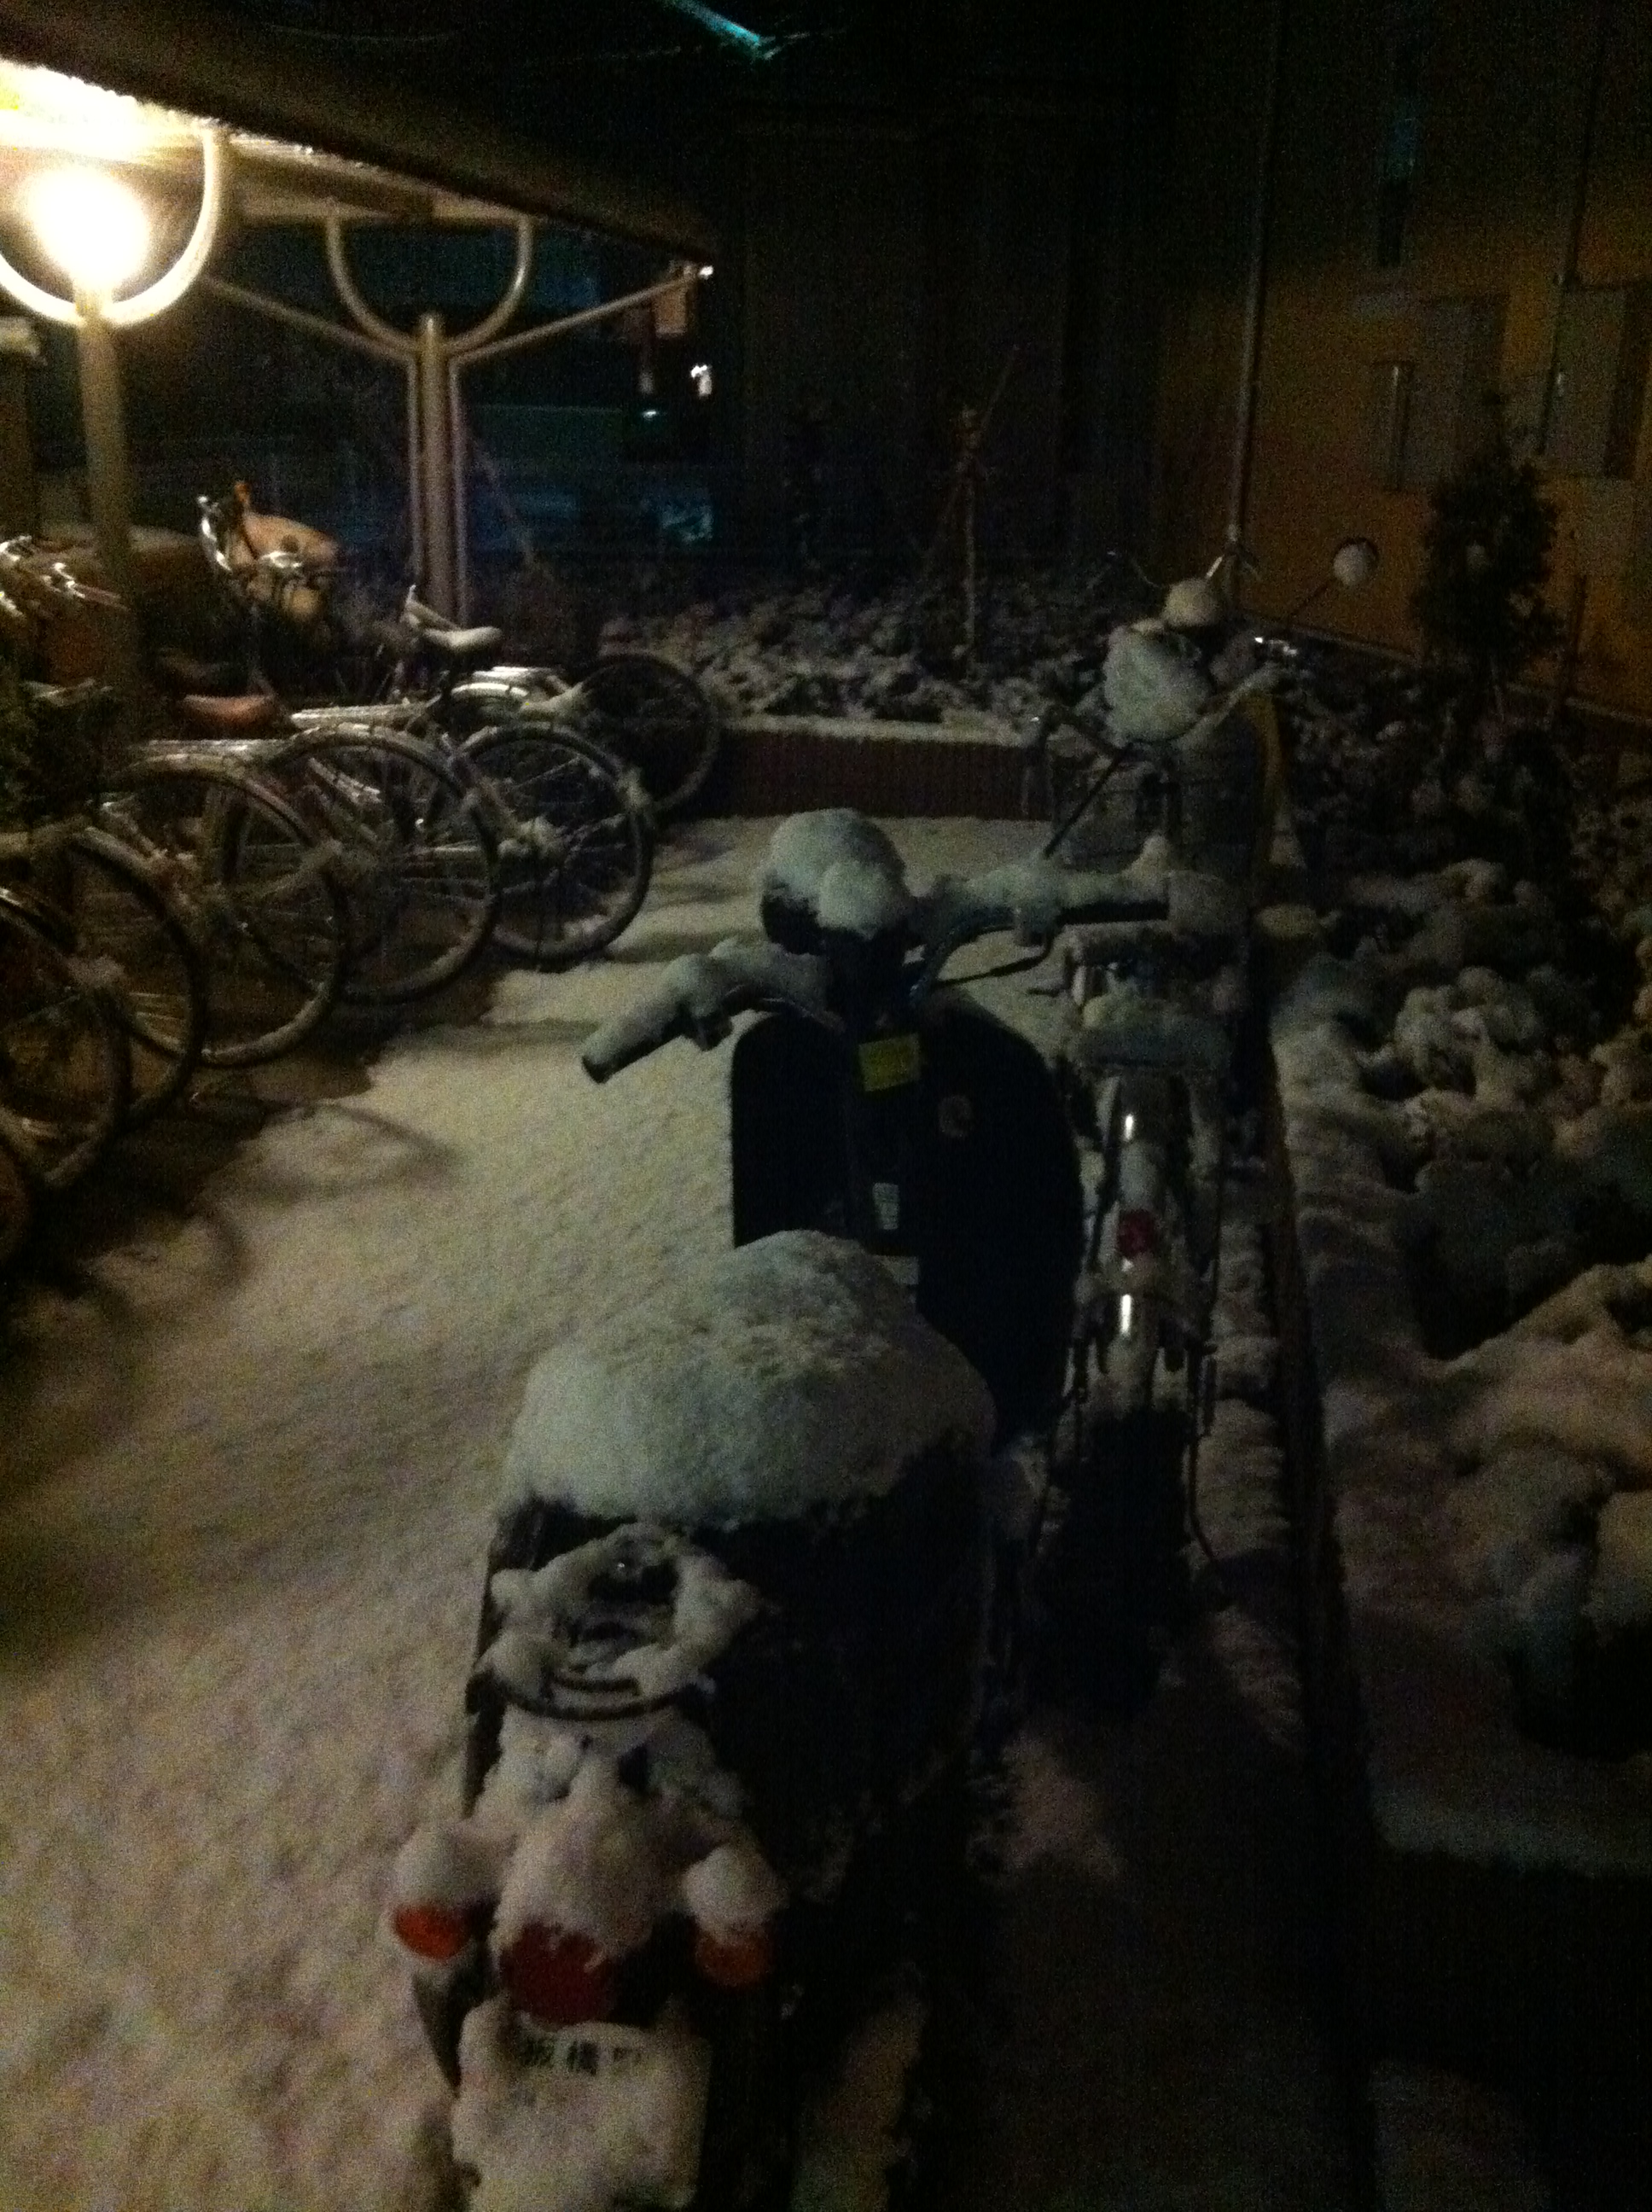 Snow covered bicycles at my home.